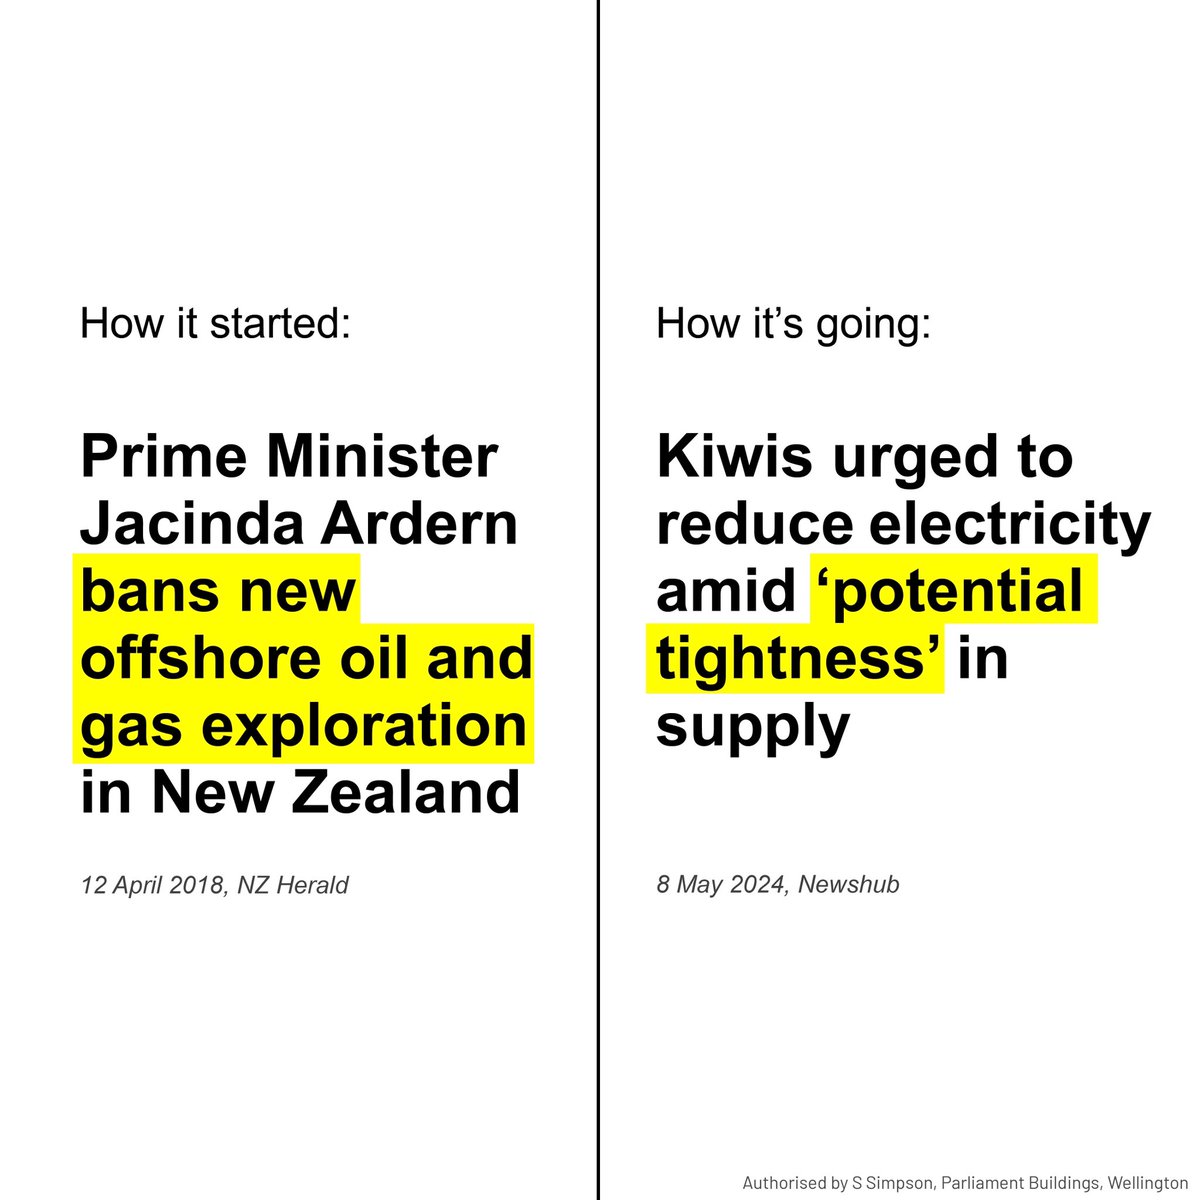 New Zealand has been left with an increasingly insecure electricity market thanks to Labour's decision to ban oil and gas exploration. We're going to fix it.